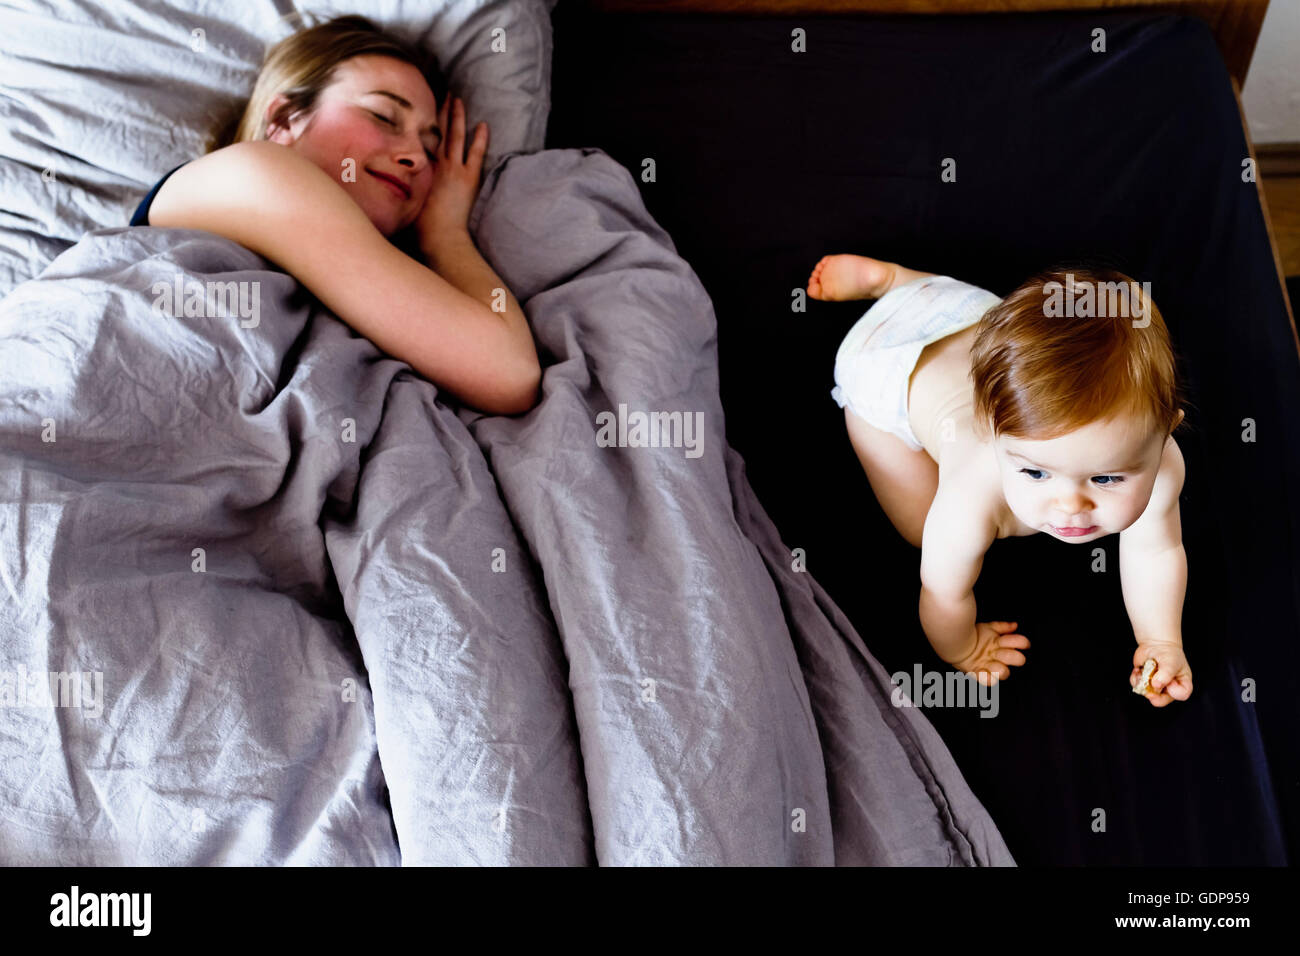 Baby girl crawling on bed while mother relaxes Stock Photo